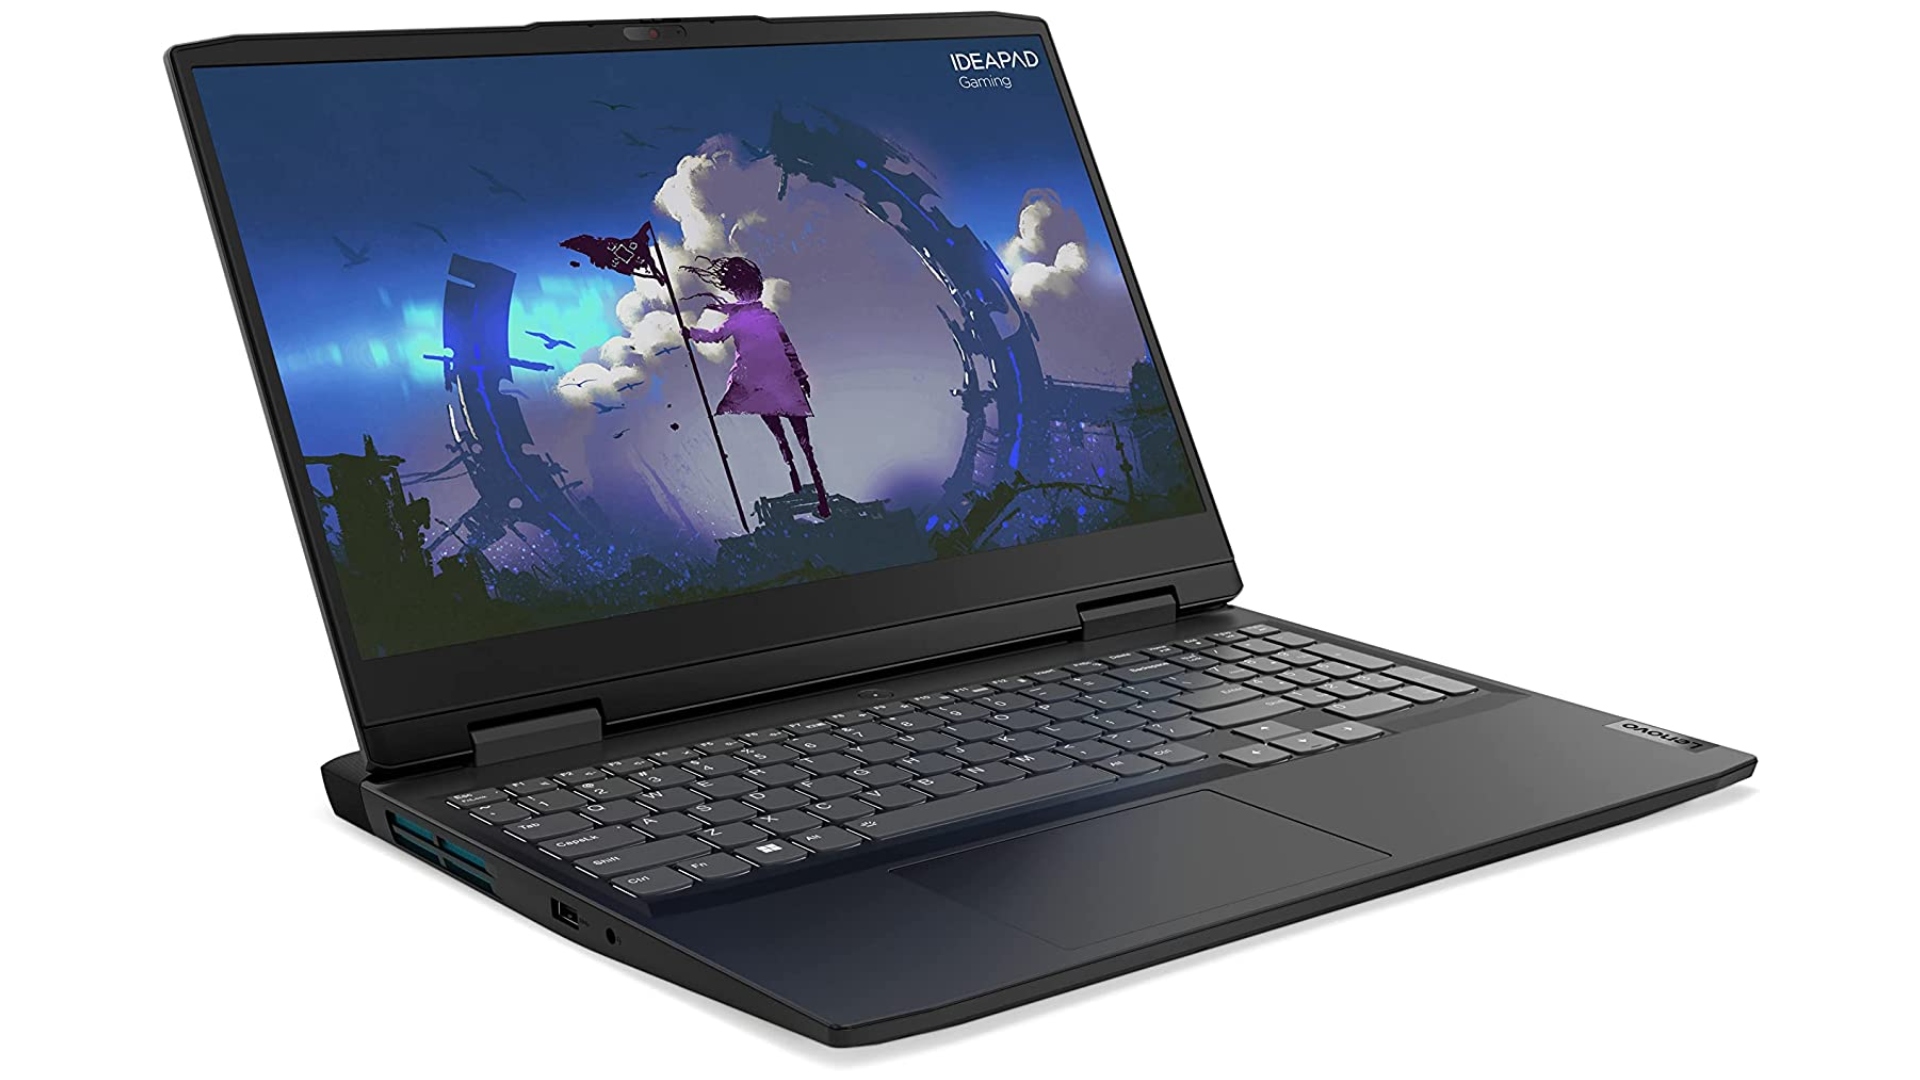 Lenovo gaming laptops up to $200 off in Amazon Prime Day sales